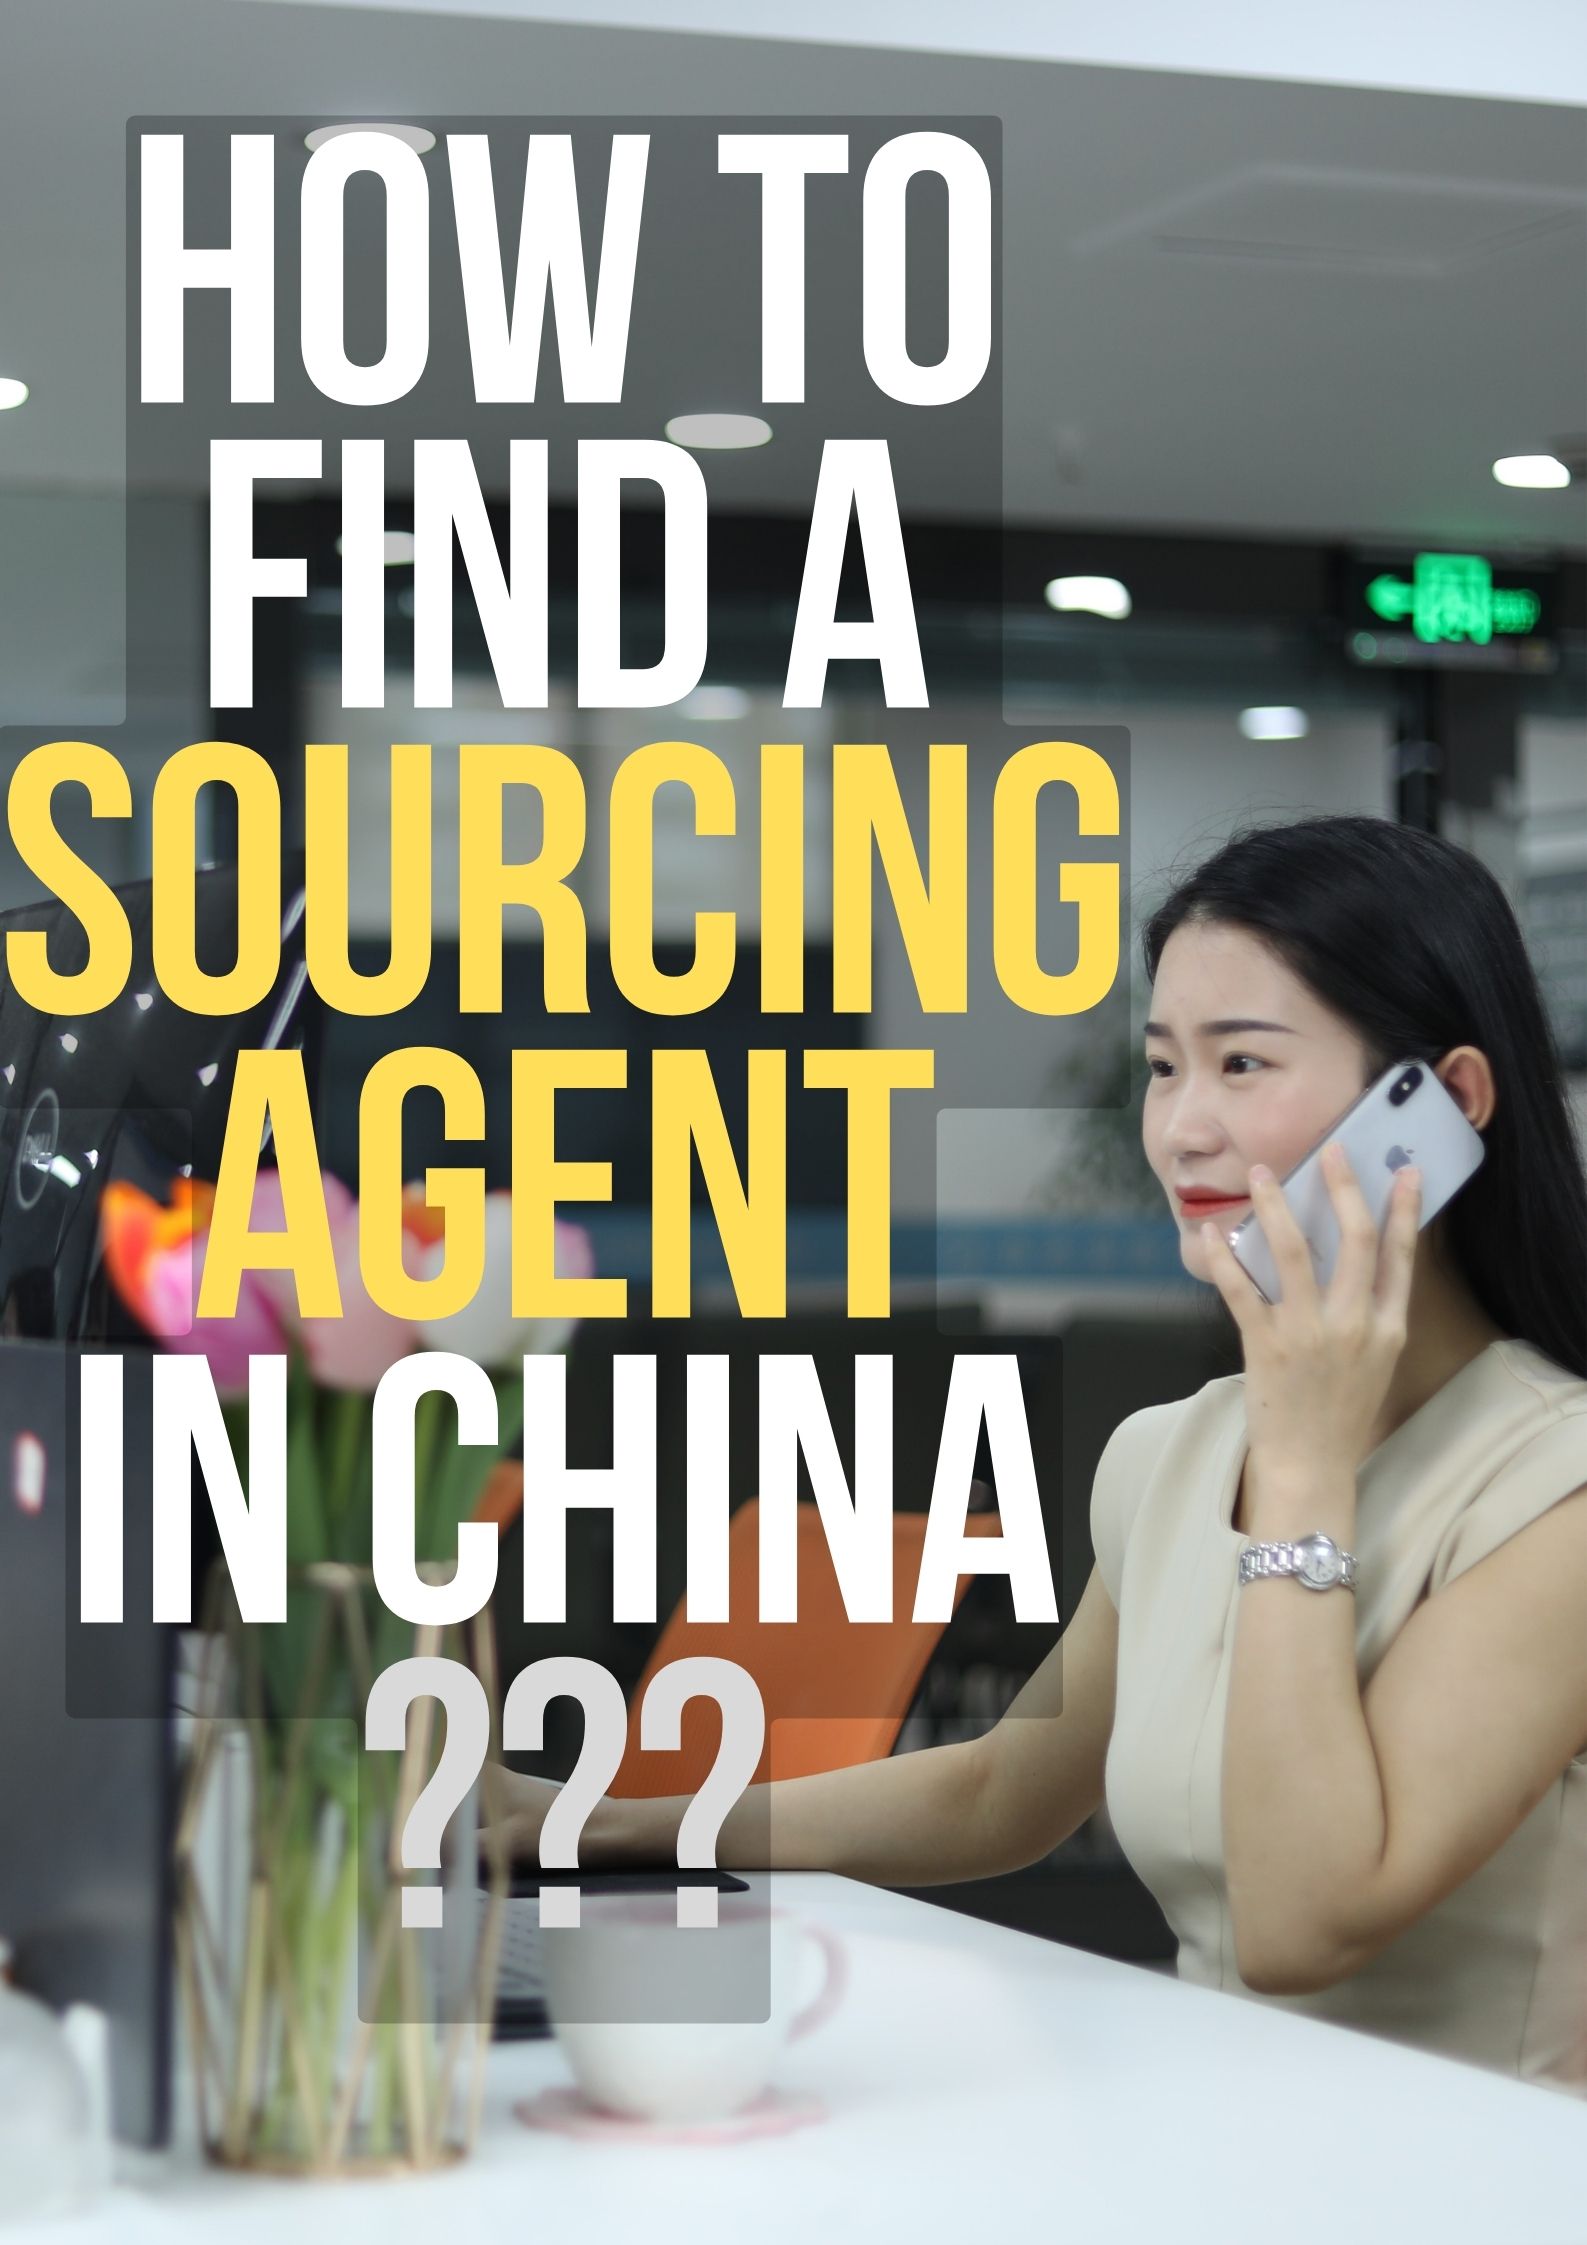 China Sourcing Agent